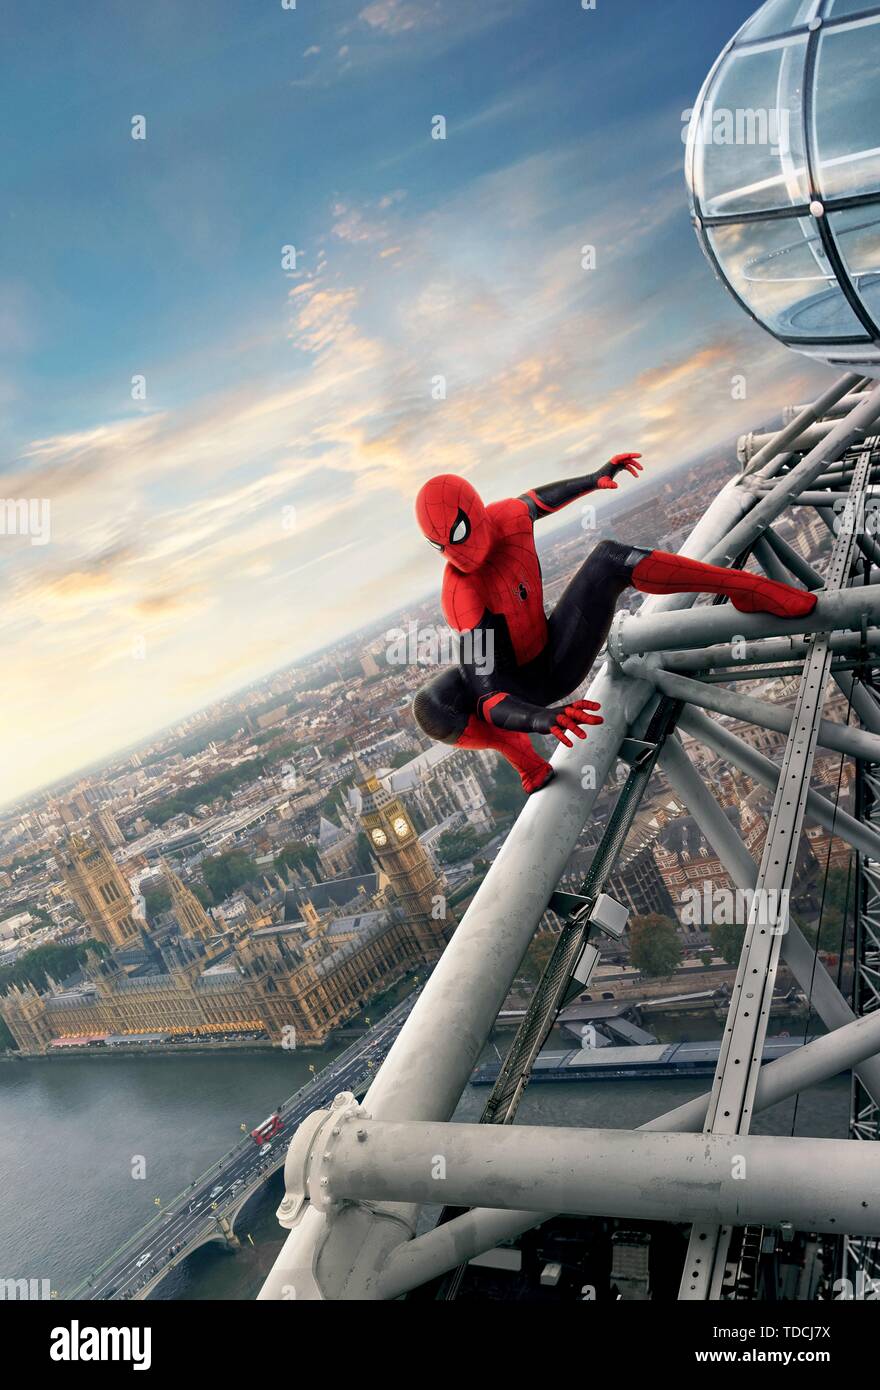 TOM HOLLAND in SPIDER-MAN: FAR FROM HOME (2019). Credit: COLUMBIA PICTURES/MARVEL ENTERTAINMENT / Album Stock Photo